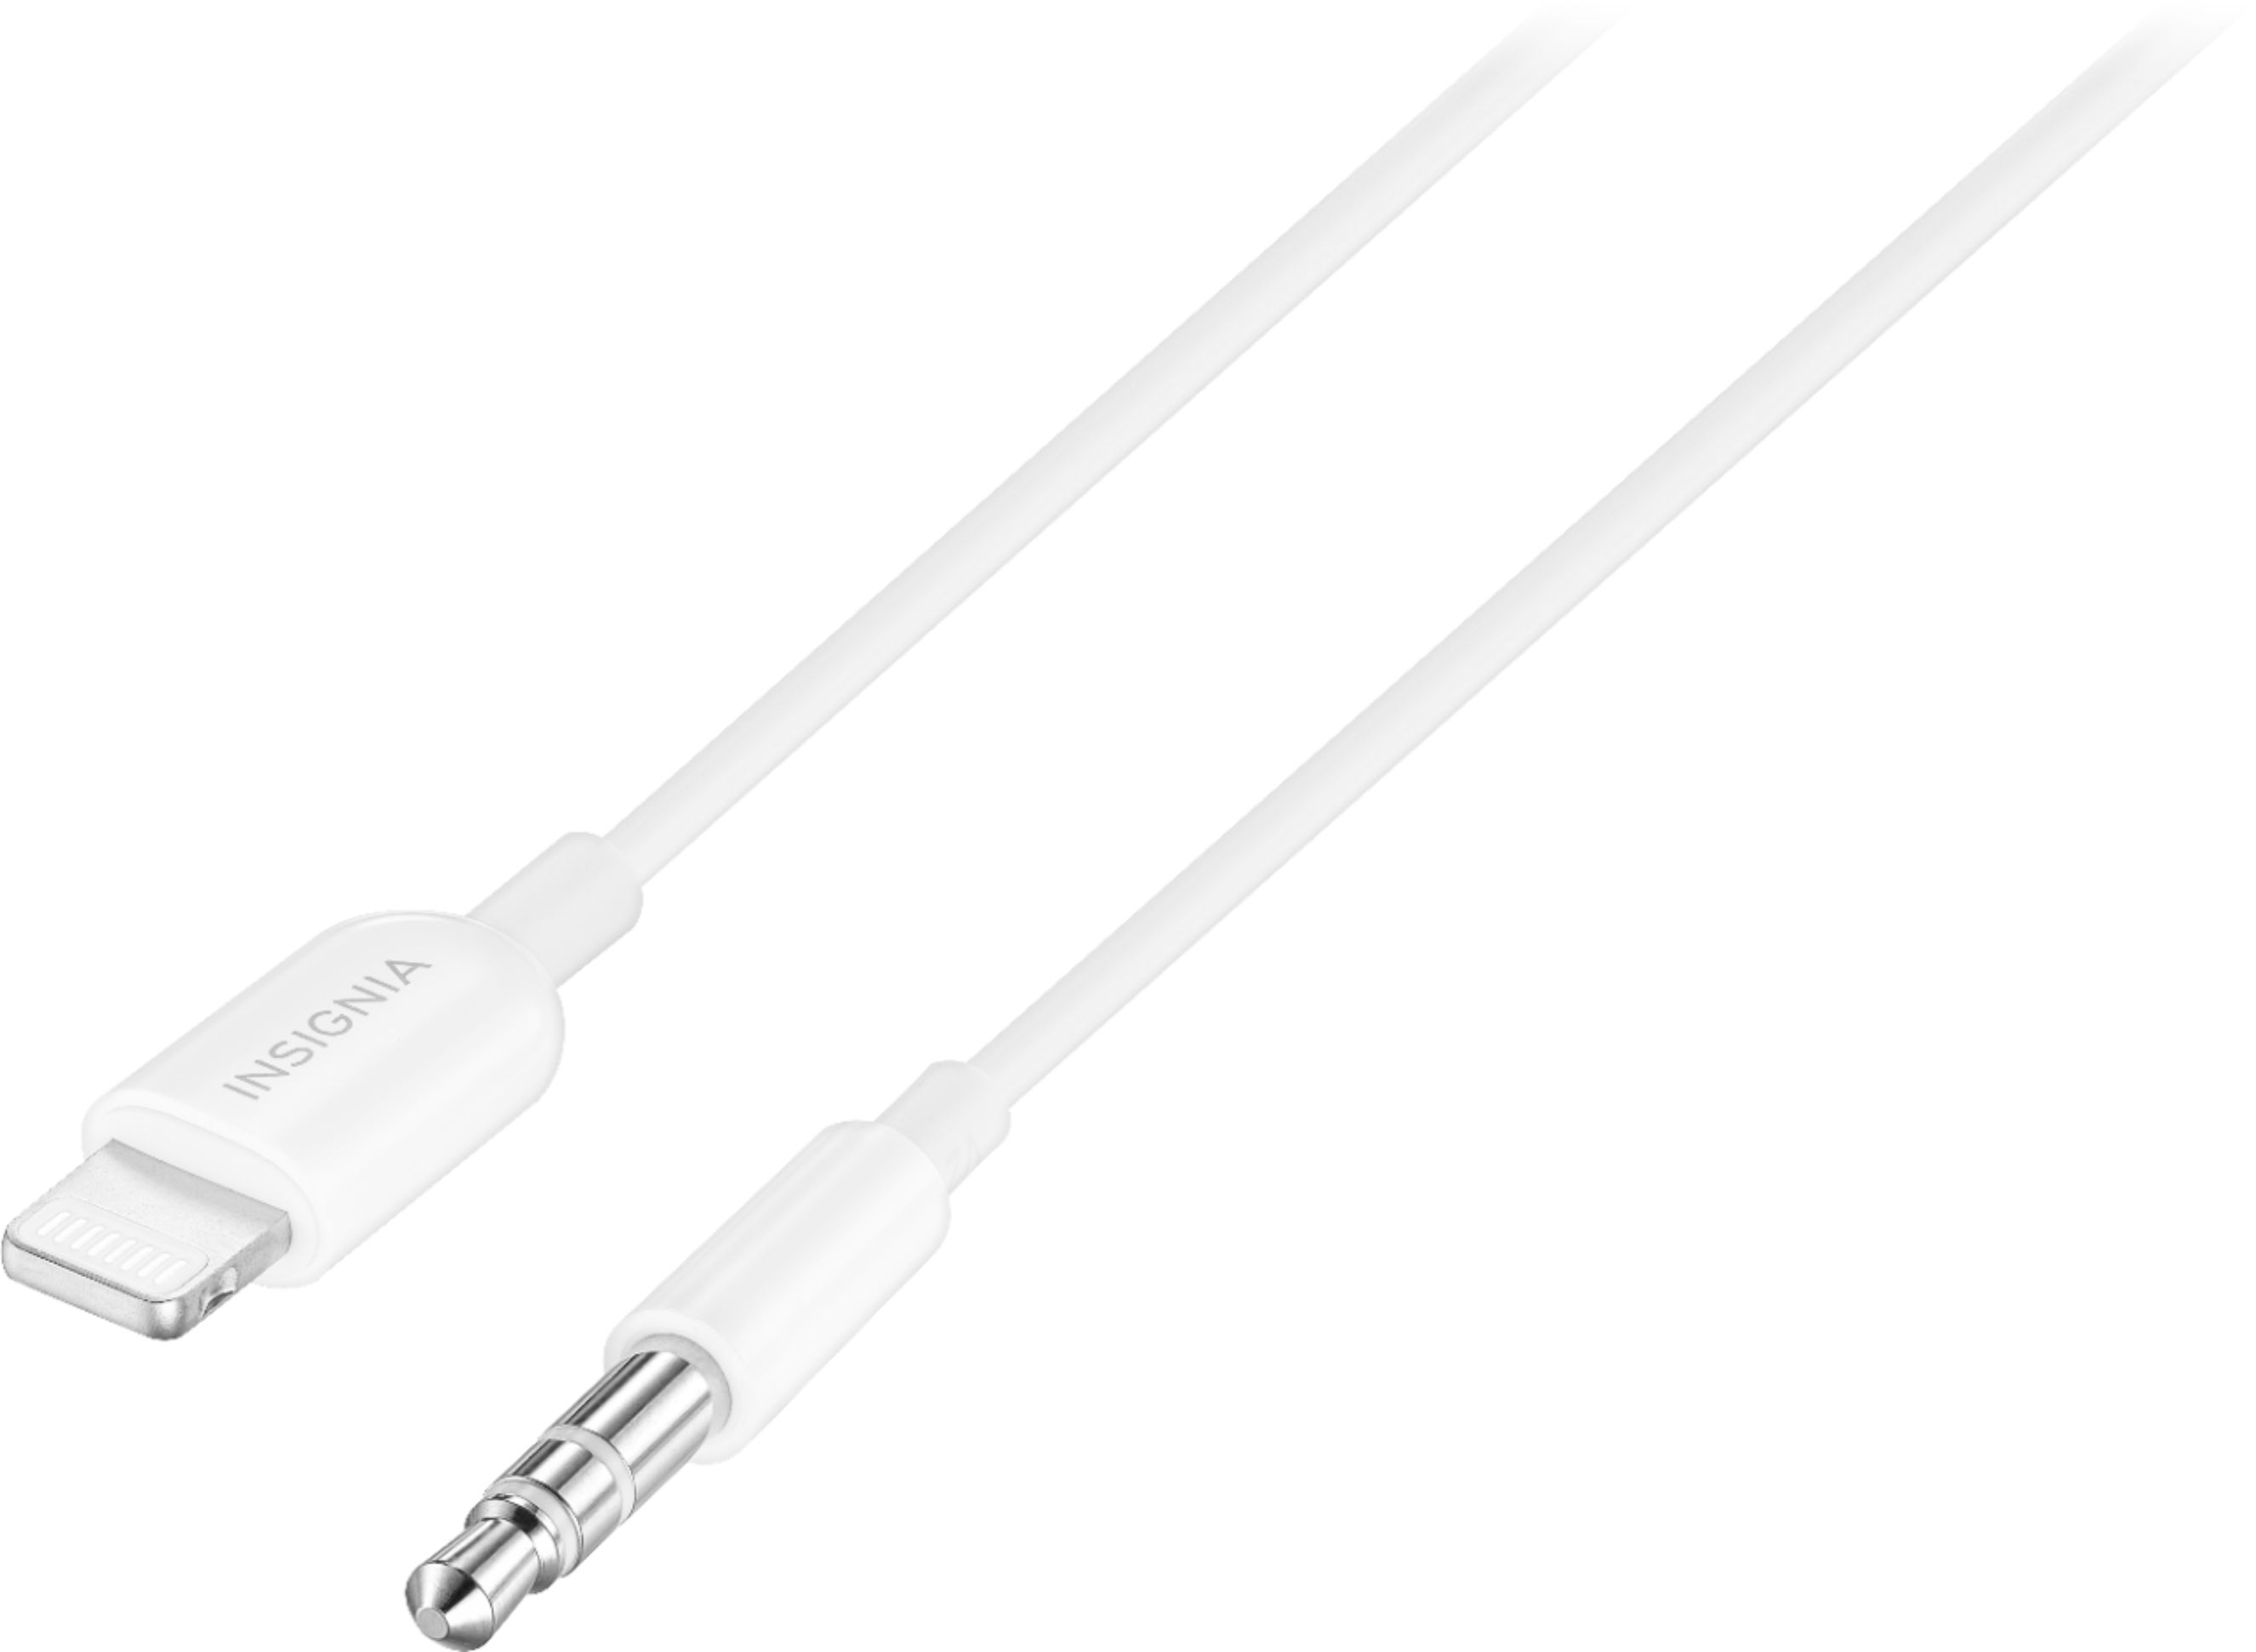 Insignia - 6' Lightning to 3.5 mm Audio Cable - White